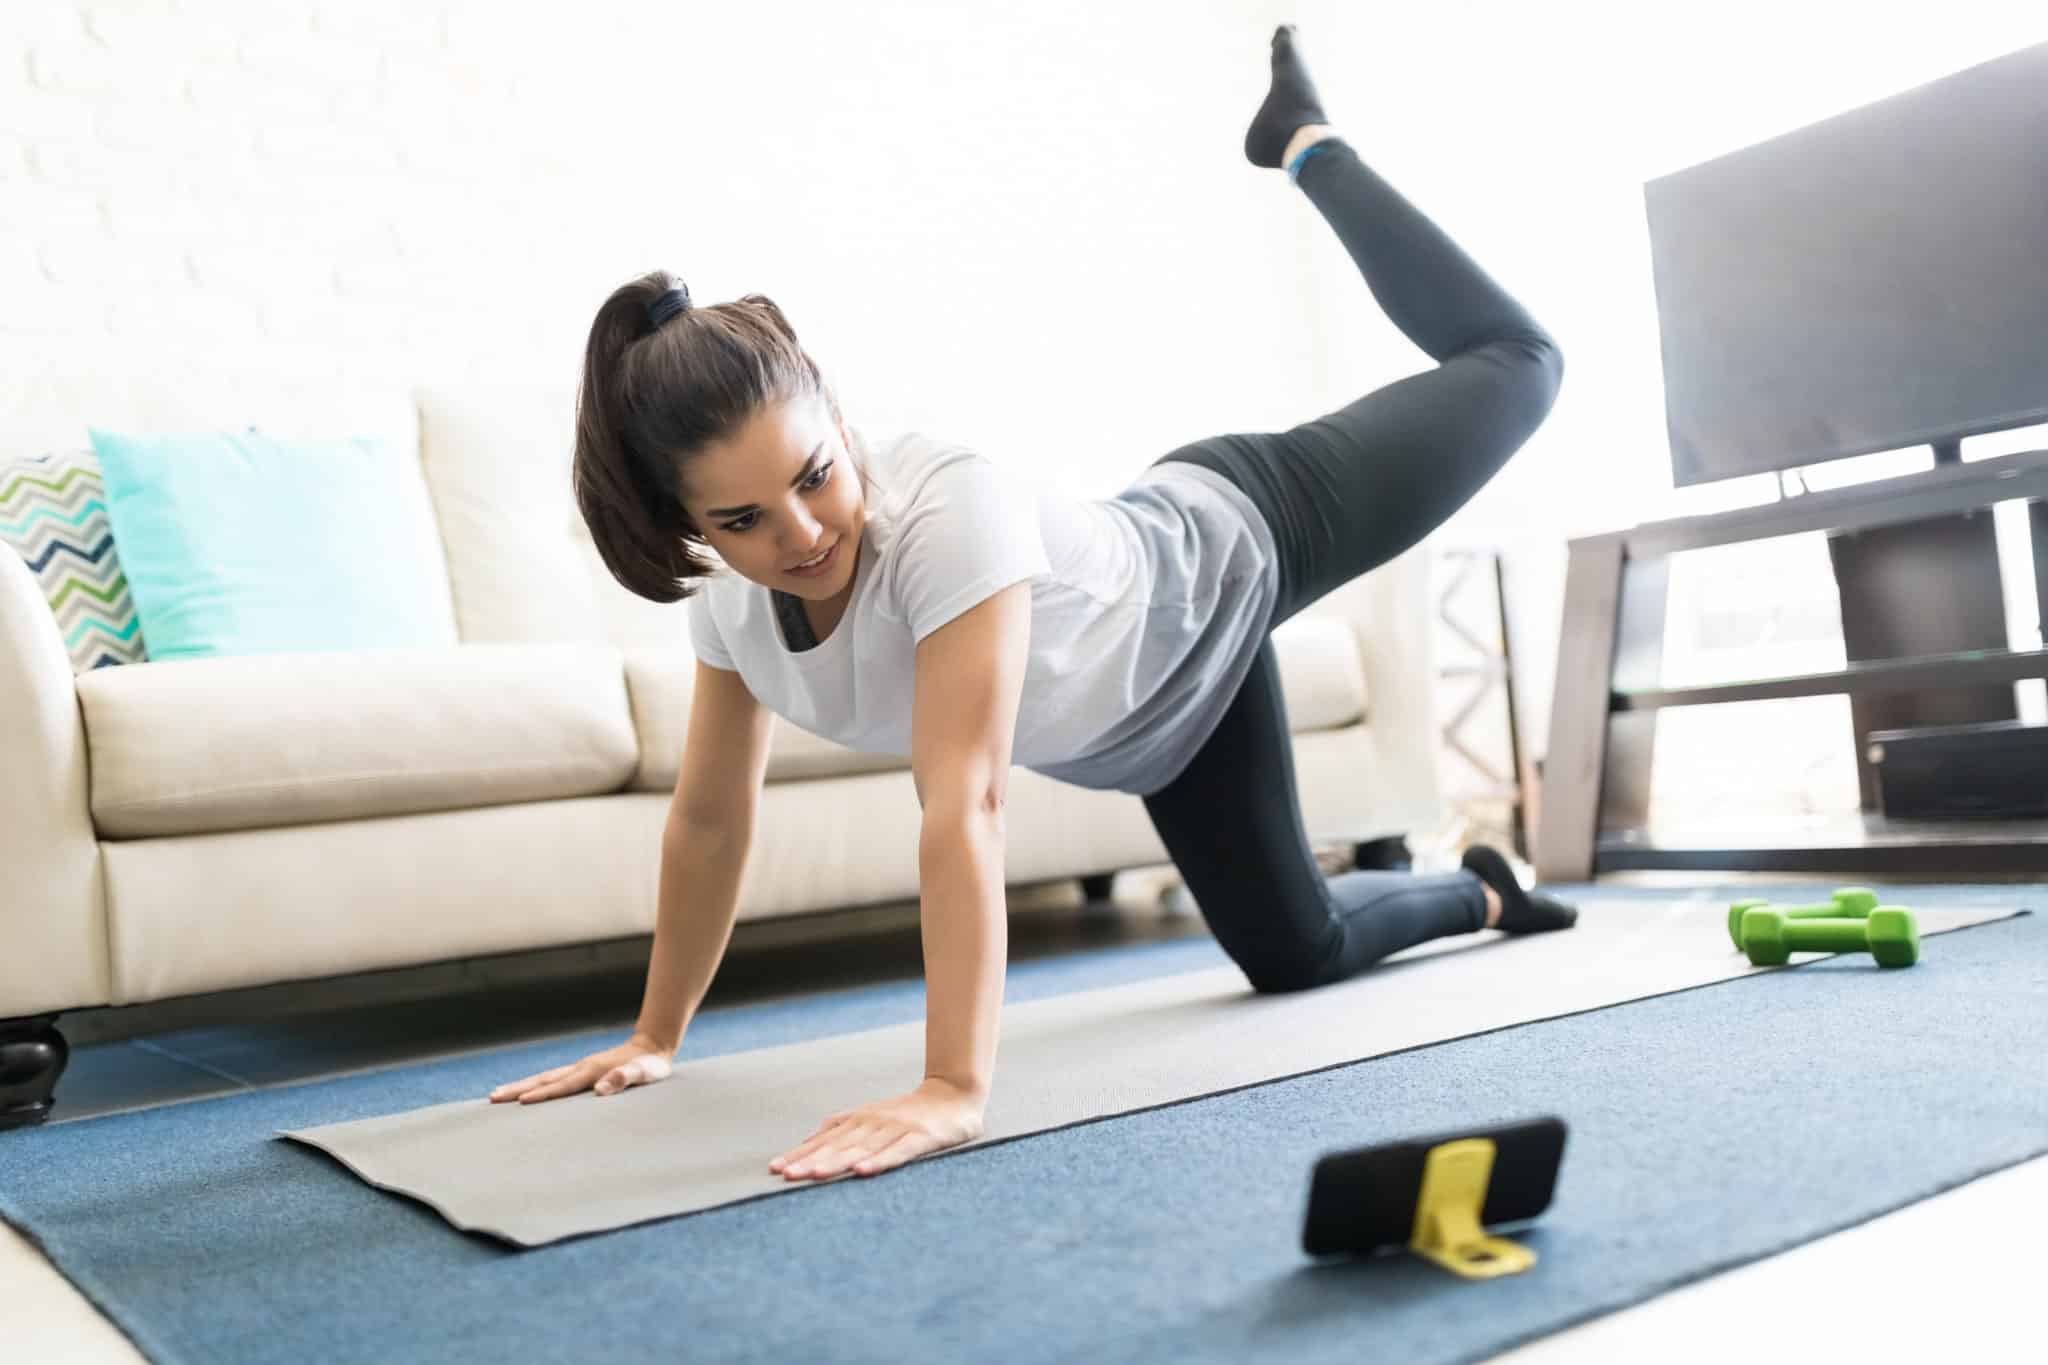 Woman doing an EMOM workout in living room looking at the phone timer